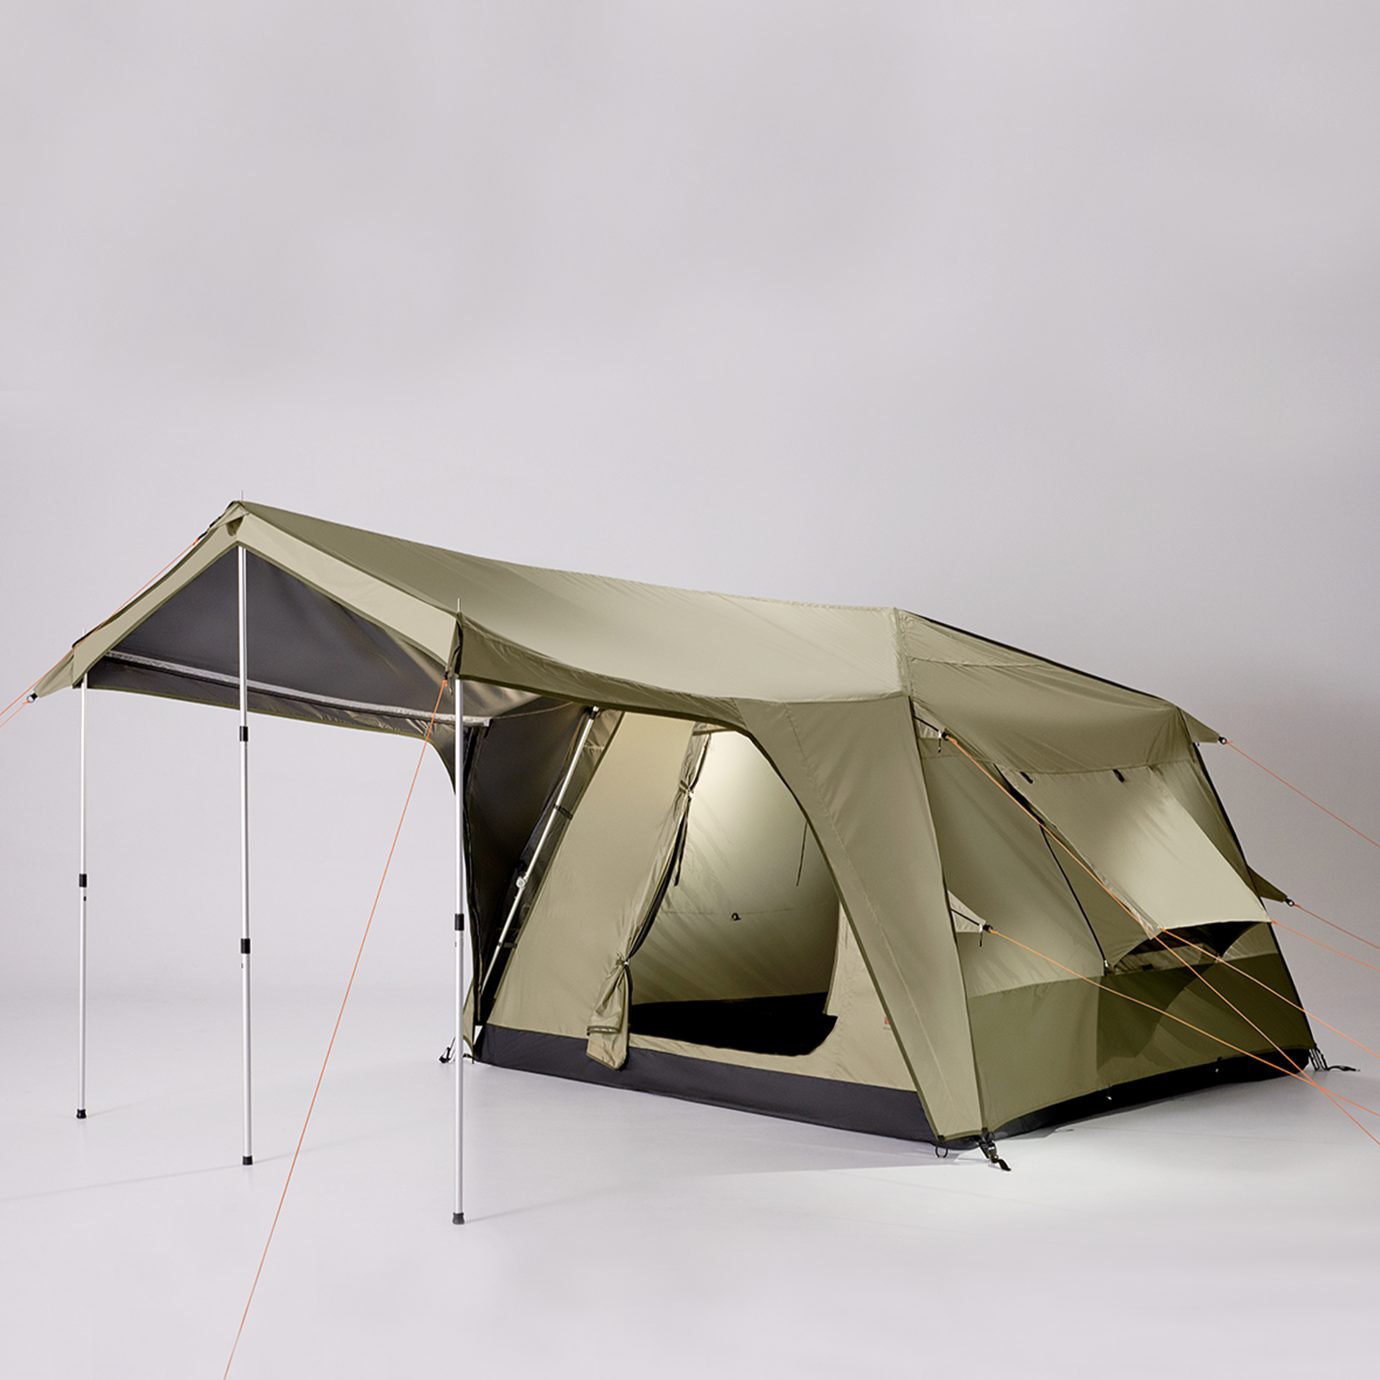 BlackWolf Turbo BLK Lite 300 Tent | Premium Quality for the Best Experience